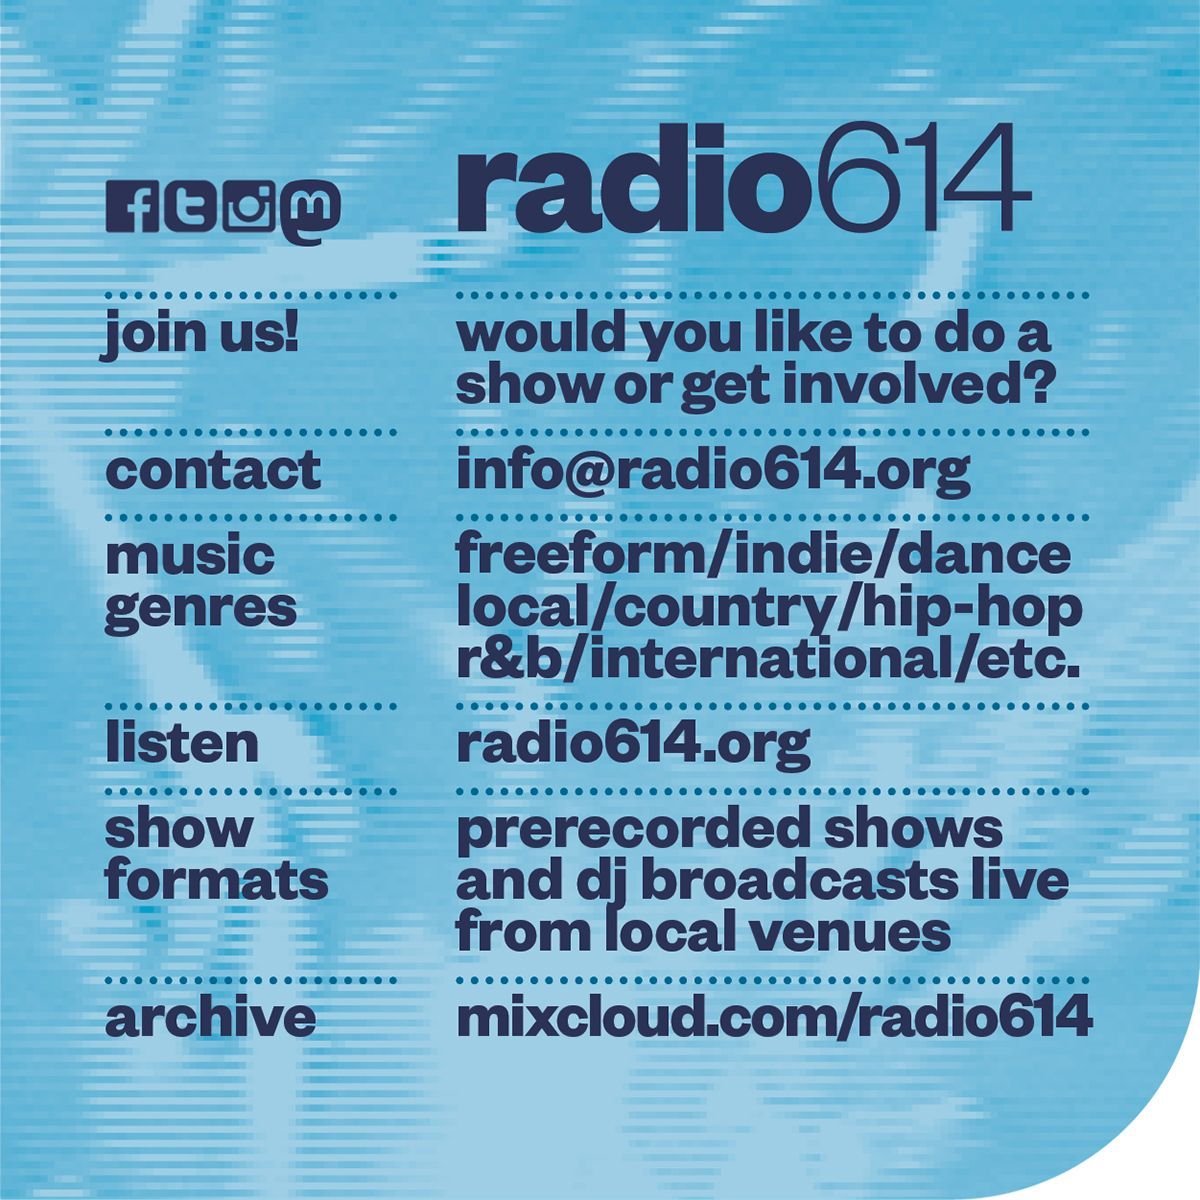 All about @radio614 -- Want to do a show or get invloved as a volunteer? Contact us at info@radio614.org -- + Listen at -- radio614.org -- and -- mixcloud.com/radio614/